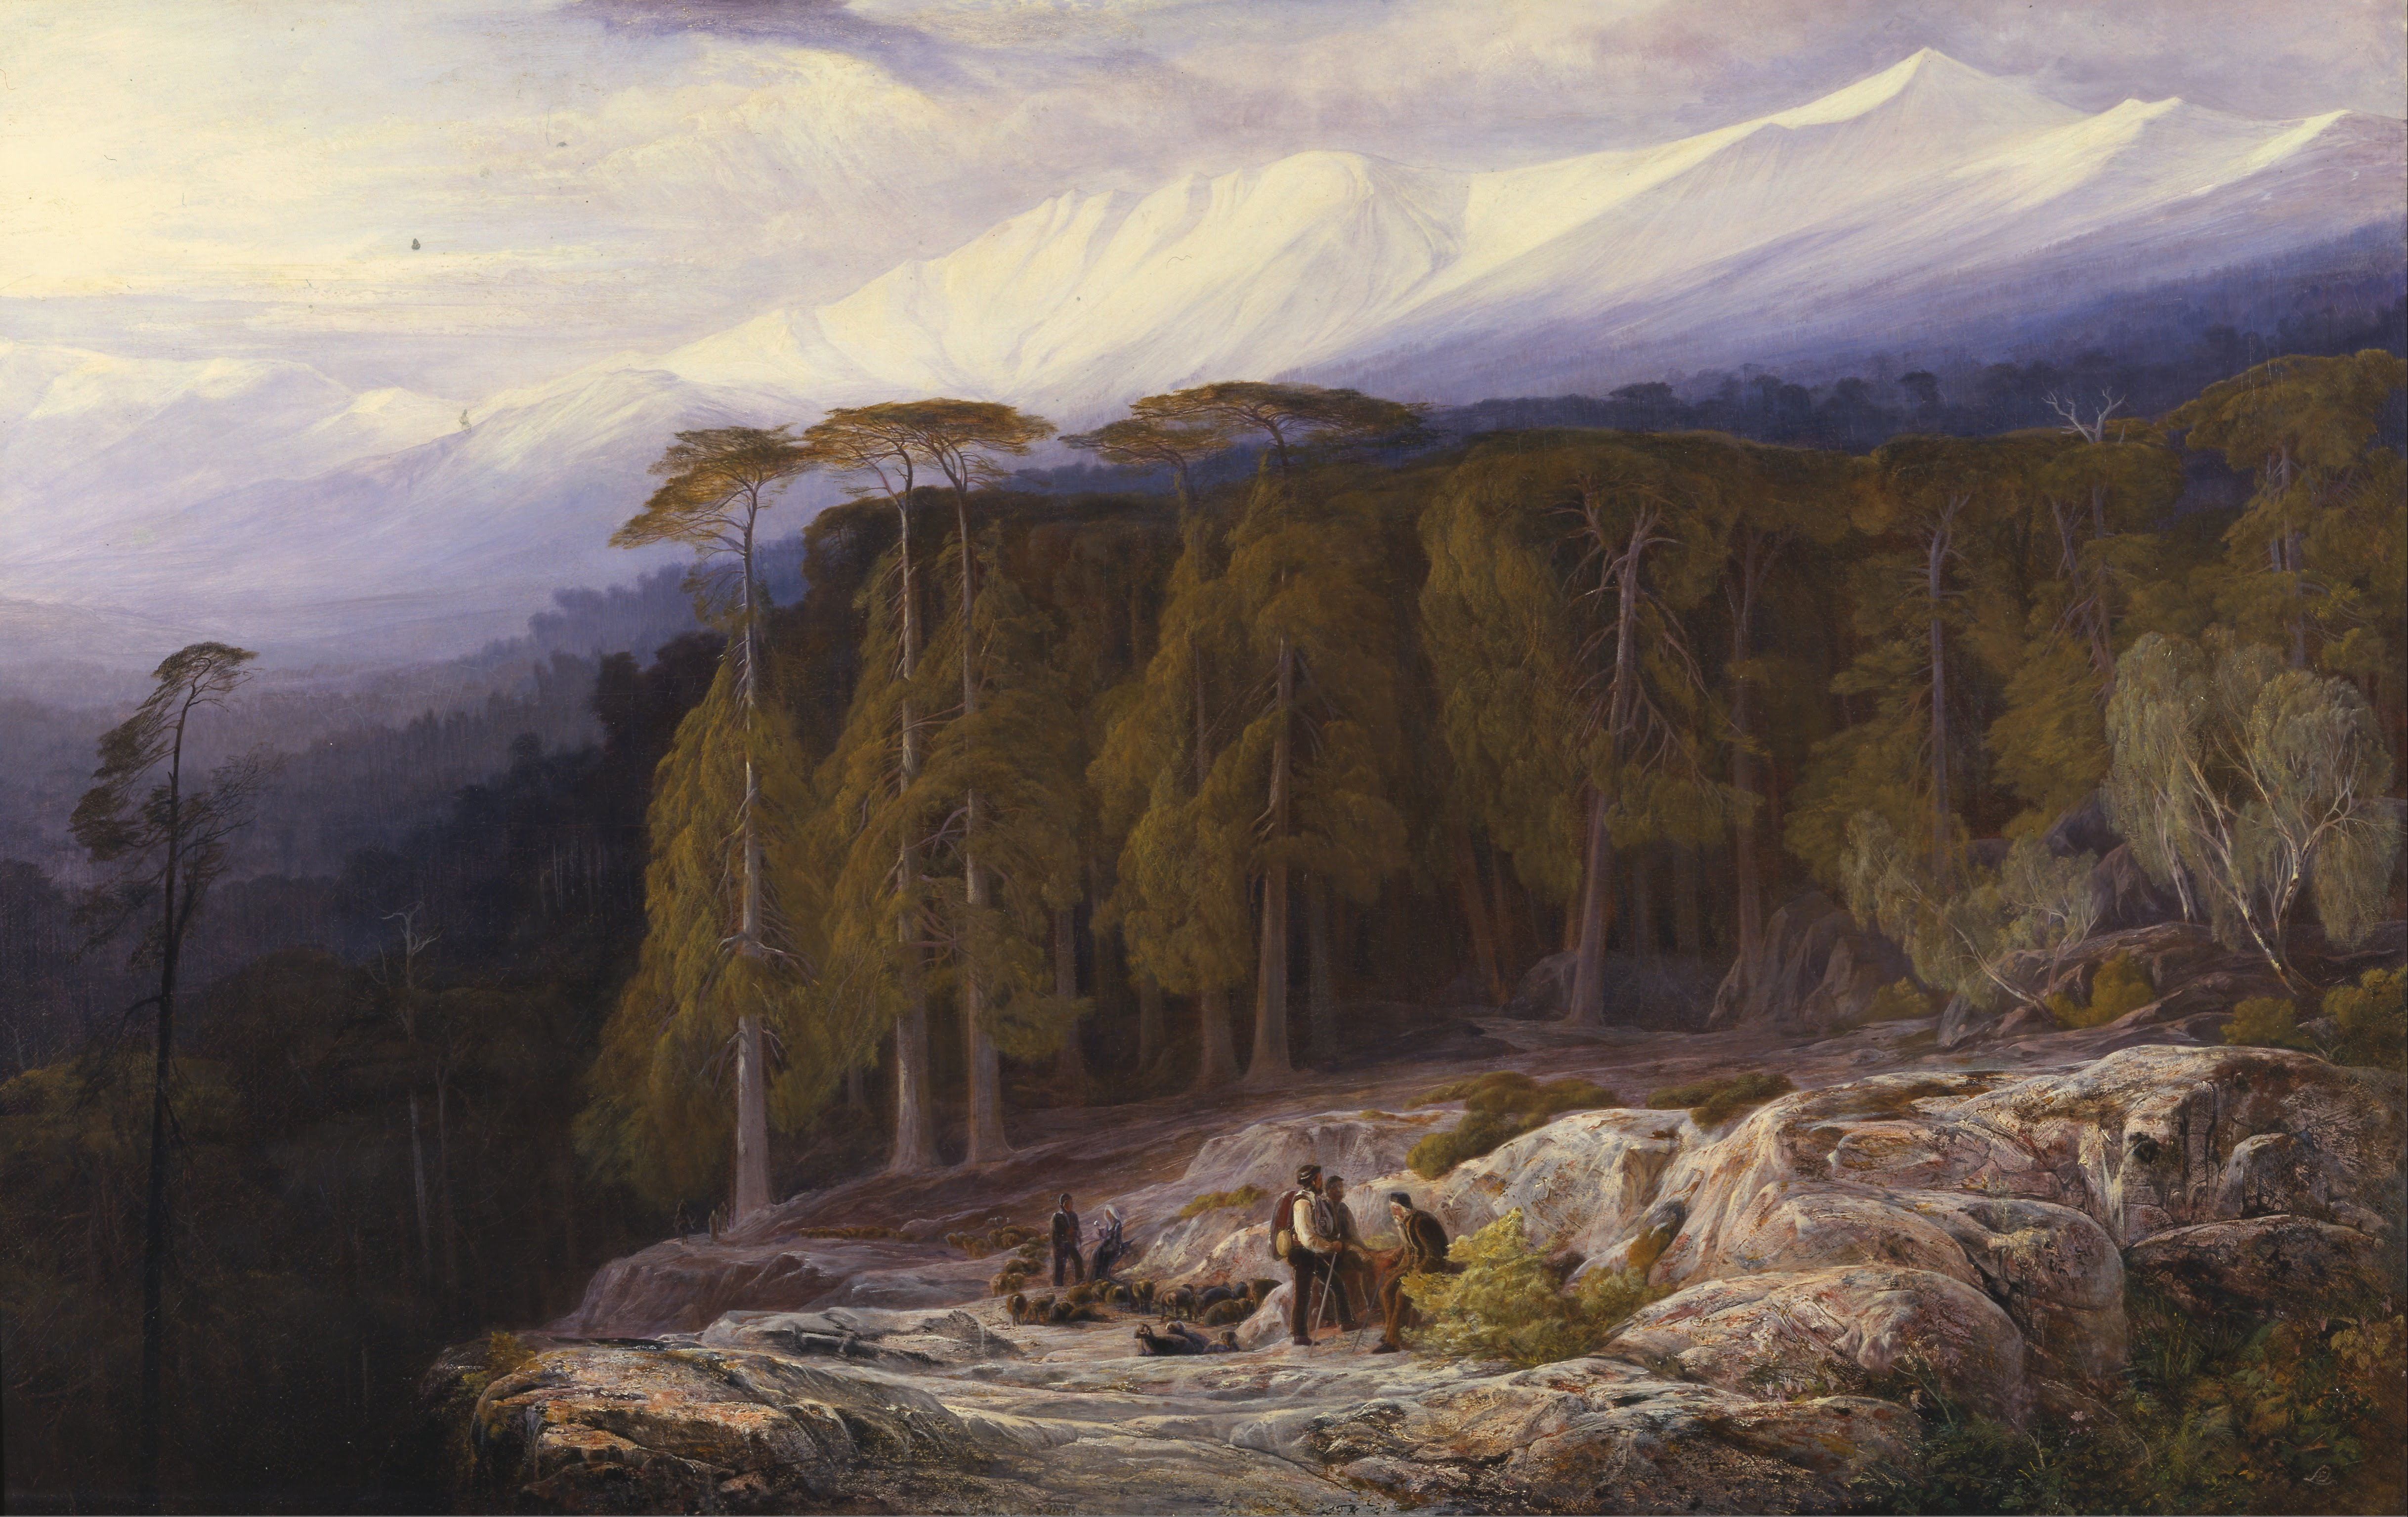 Edward Lear - The Forest of Valdoniello, Corsica - Google Art Project